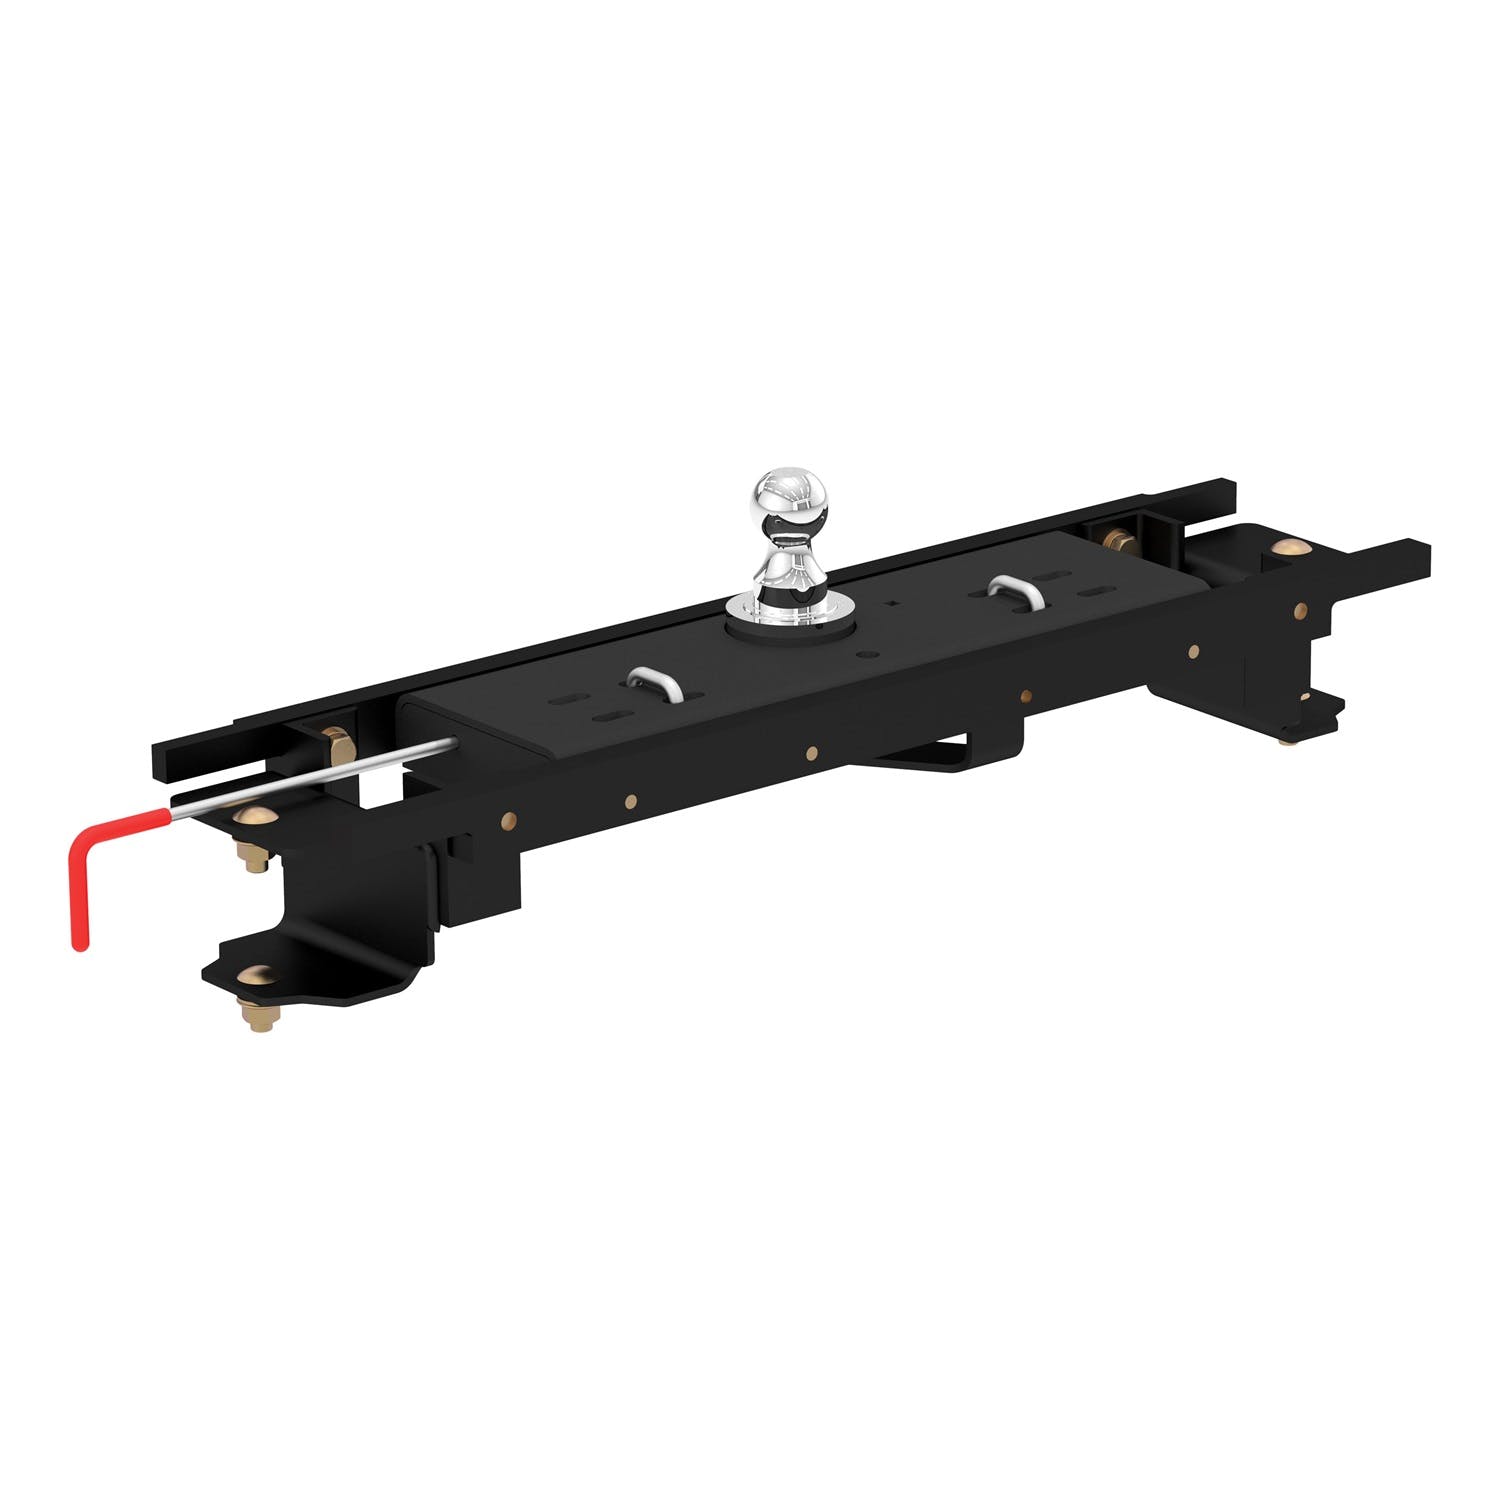 CURT 60751 Double Lock Gooseneck Hitch Kit with Brackets, Select Toyota Tundra, 6.5' Bed